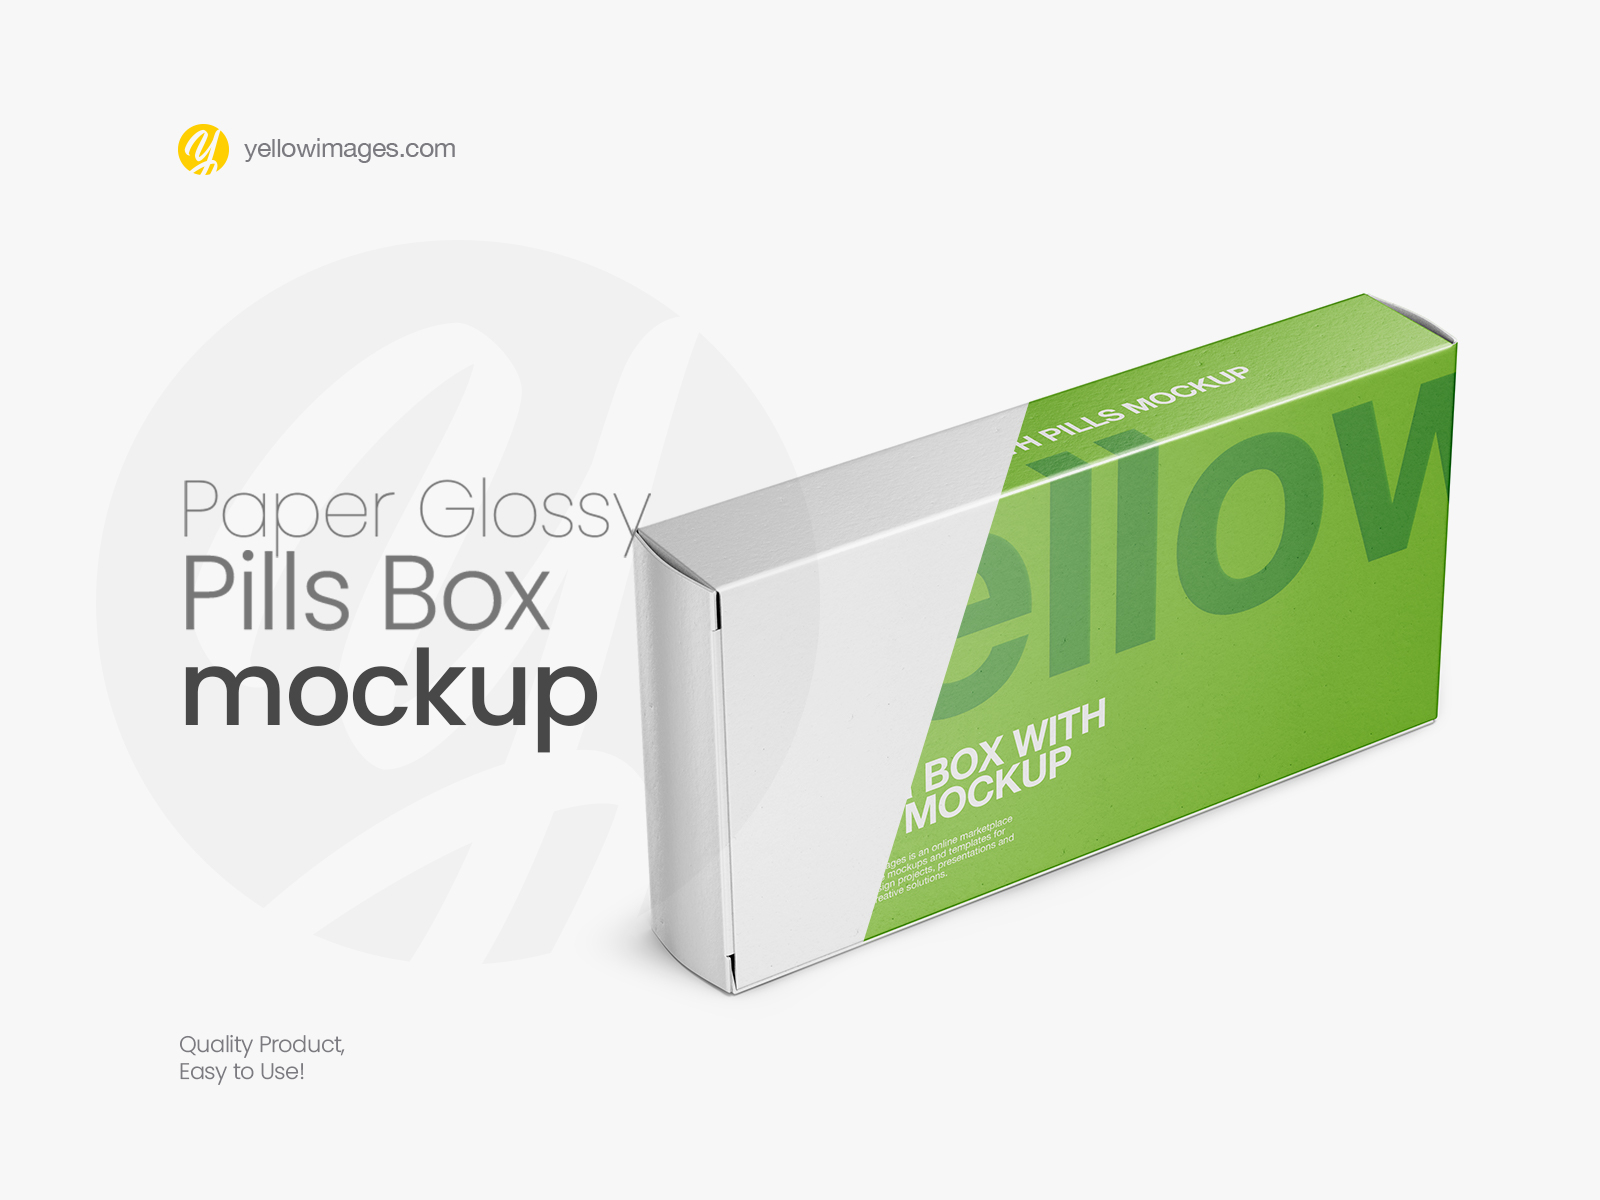 Download Free Premium Packaging Mockups Free Psd Mockups Free Psd Mockups Smart Object And Templates To Create Magazines Books Stationery Clothing Mobile Packaging Business Cards PSD Mockups.